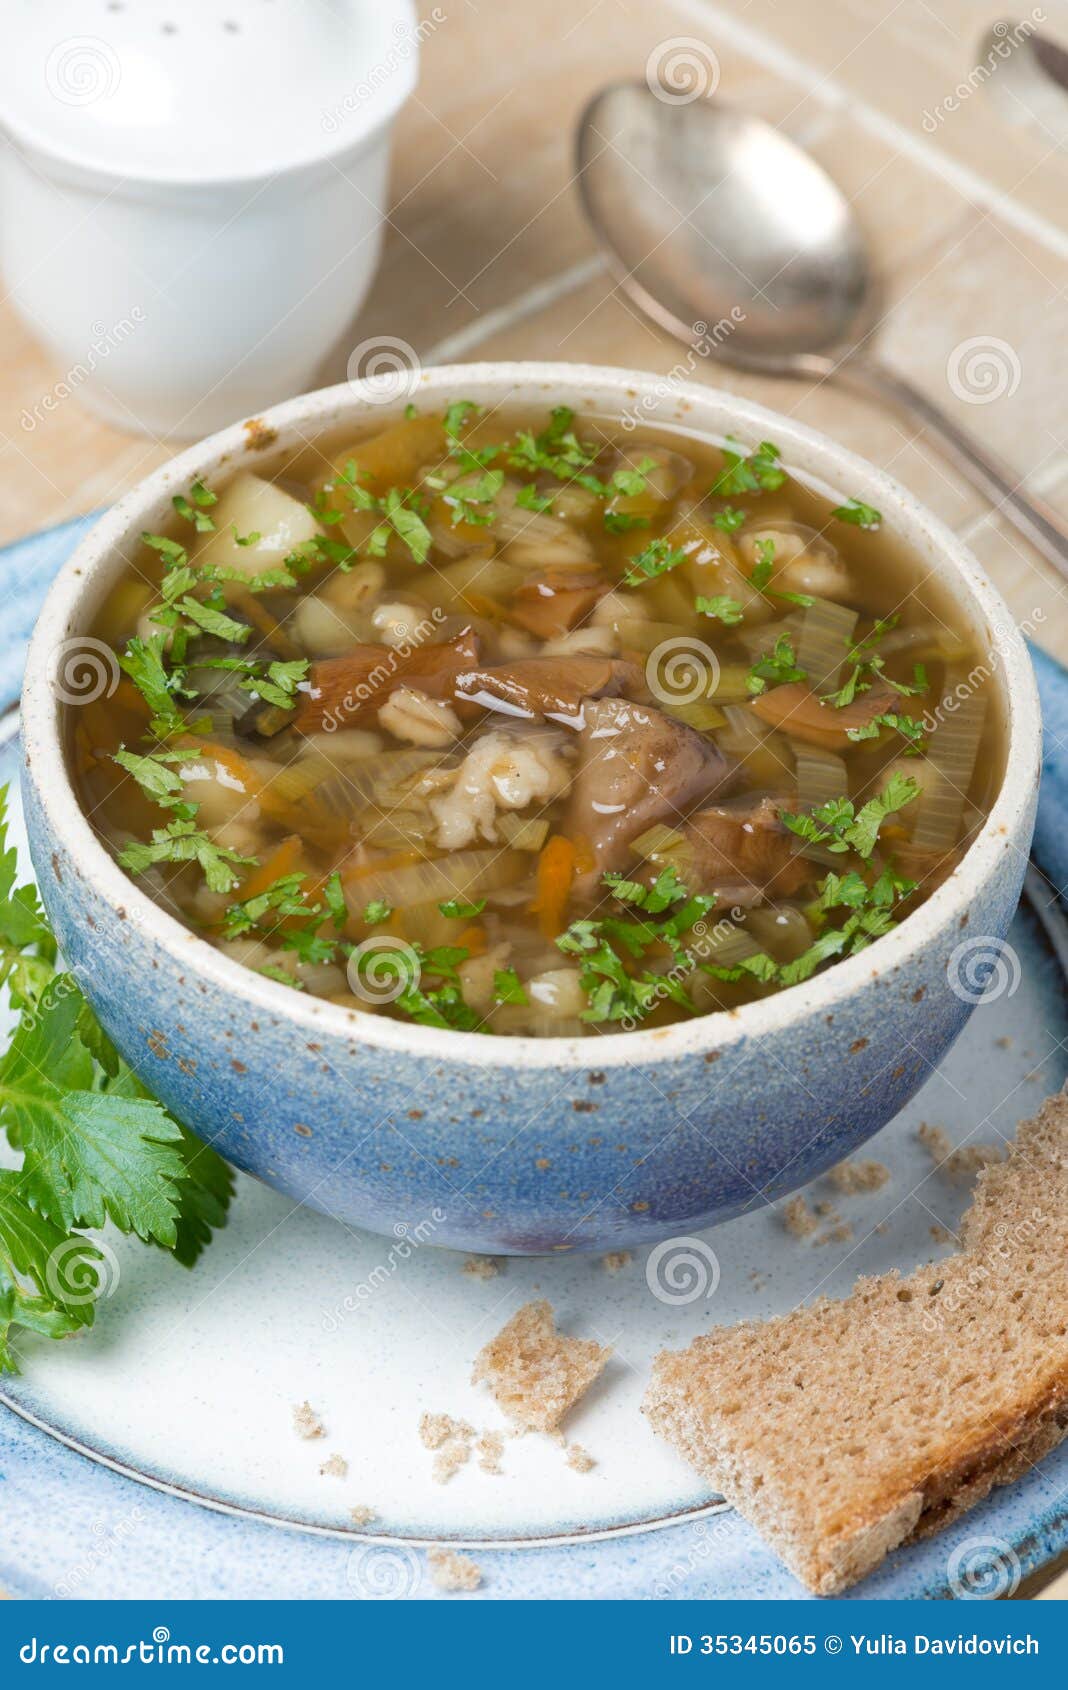 Bowl of Mushroom Soup with Pearl Barley on a Tray, Close-up Stock Image ...